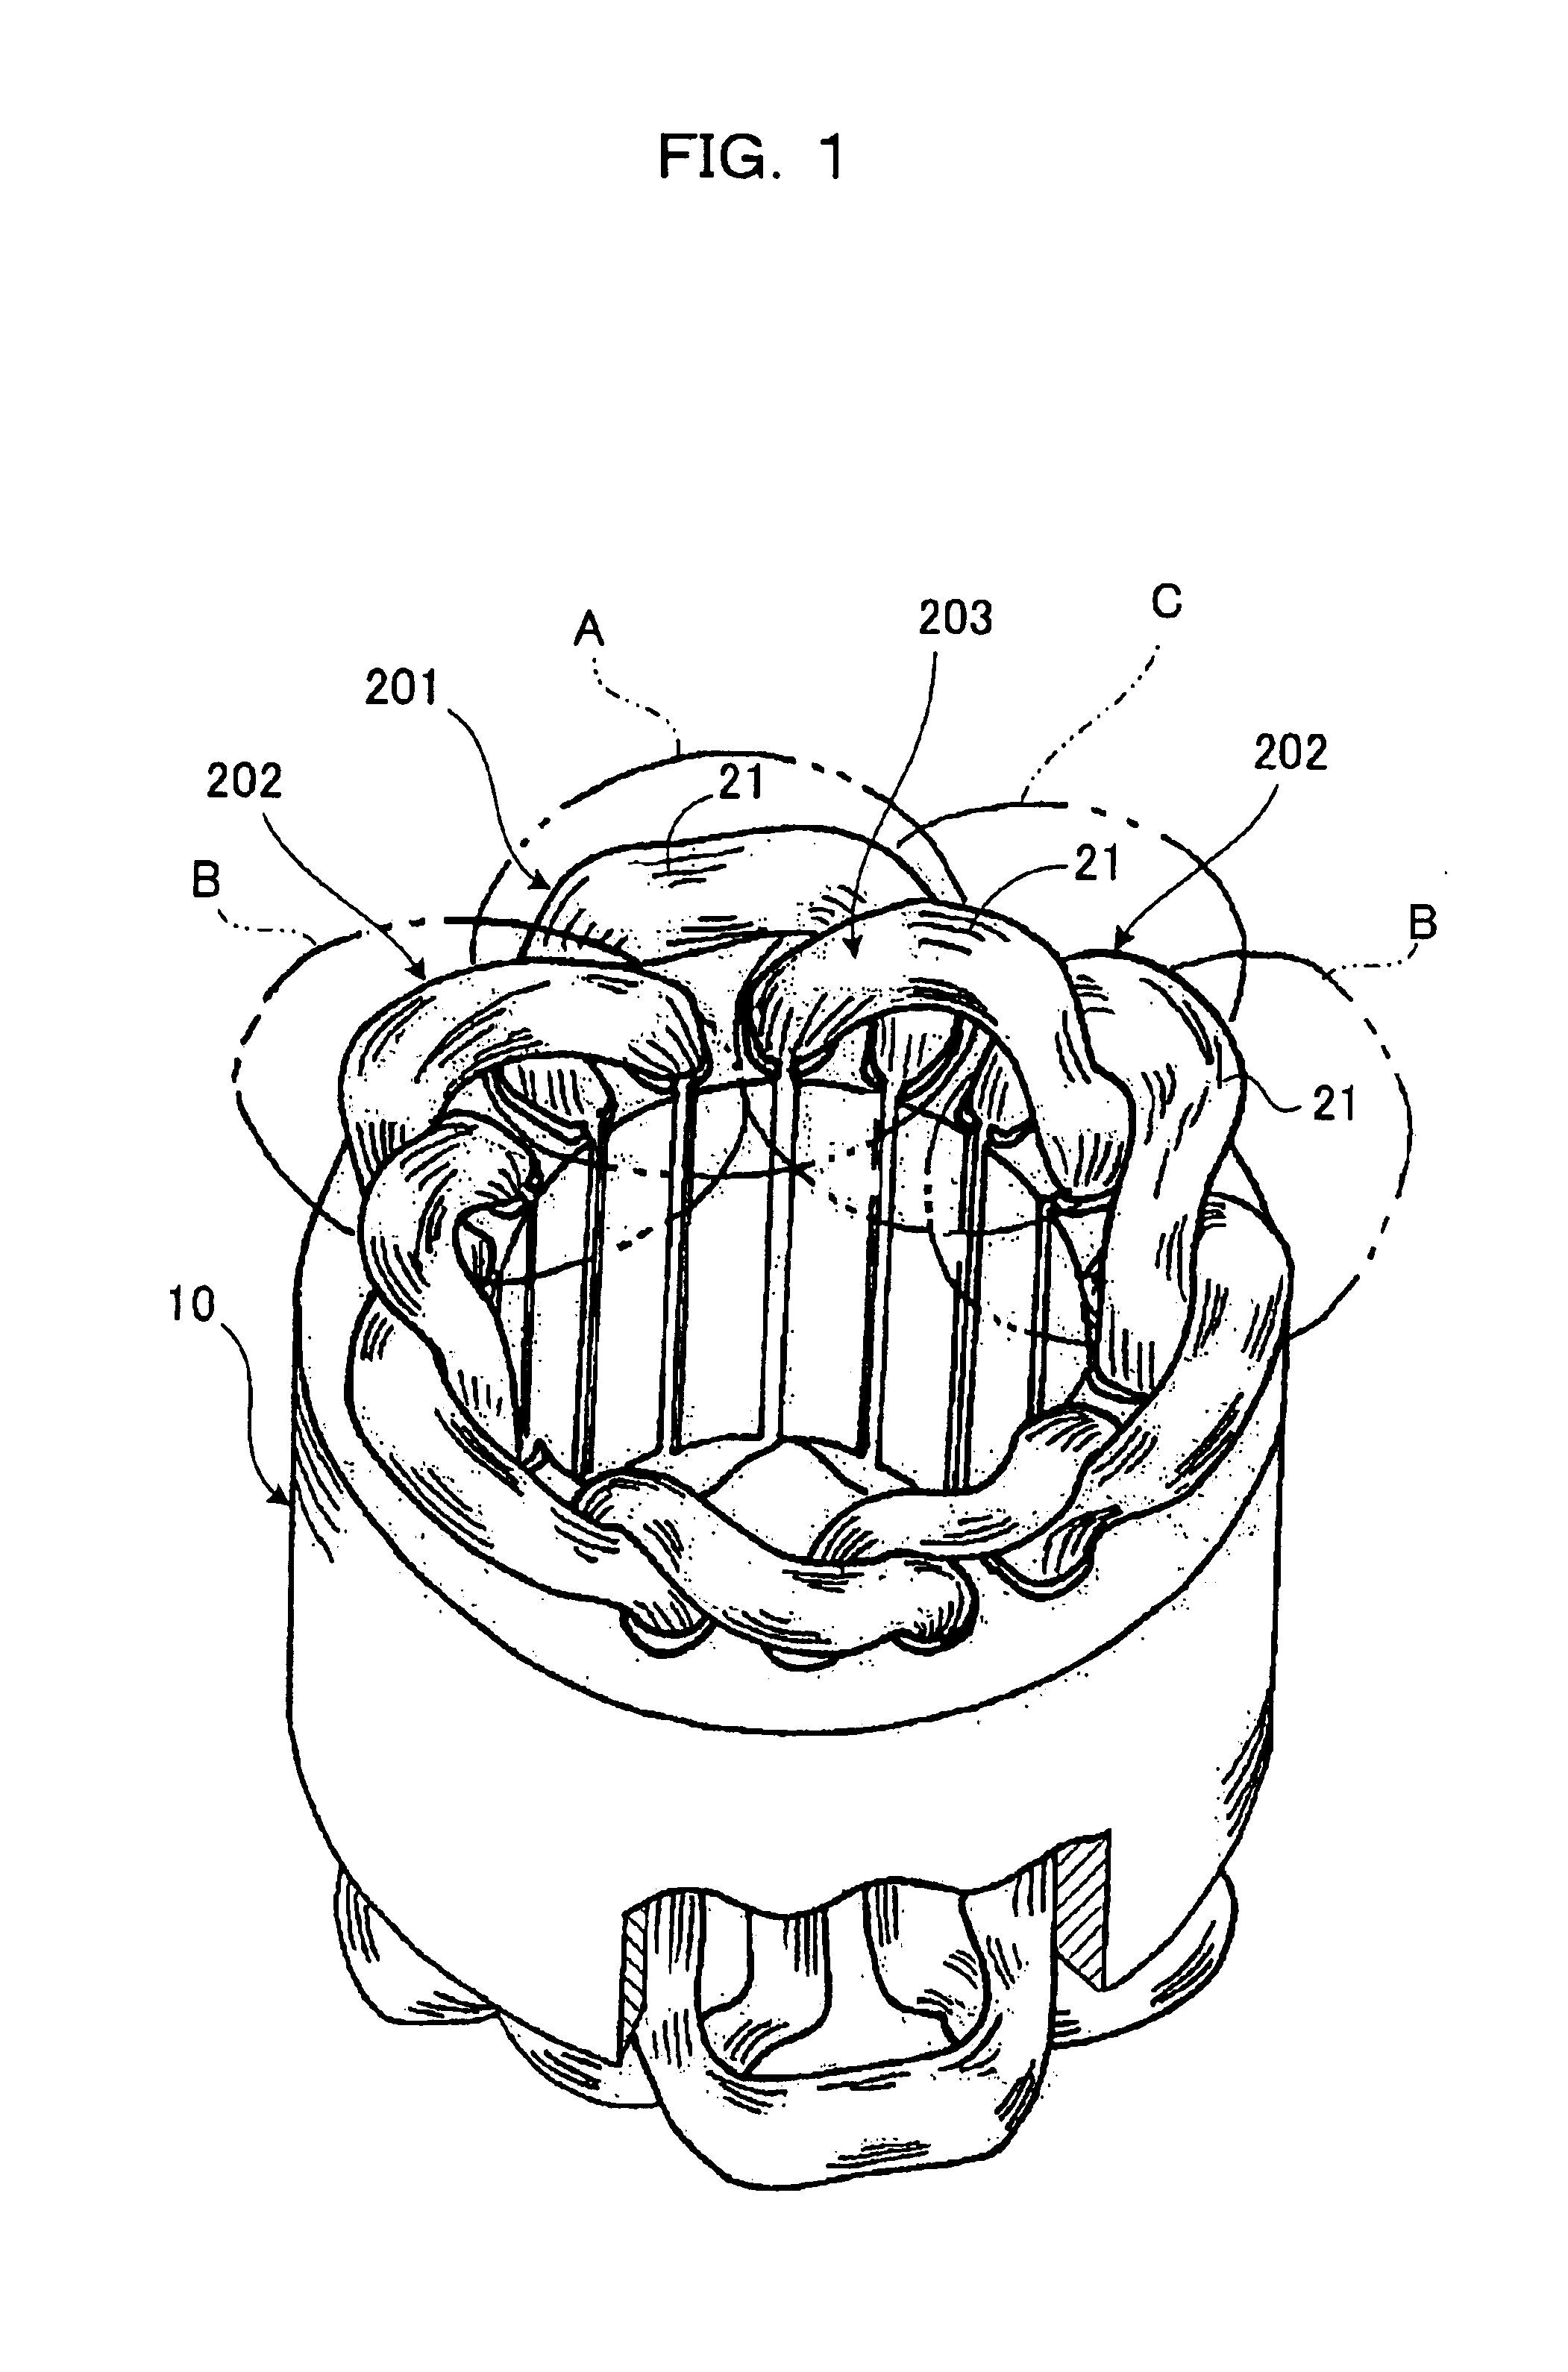 Brushless motor and hermetic compressor assembly including the same motor